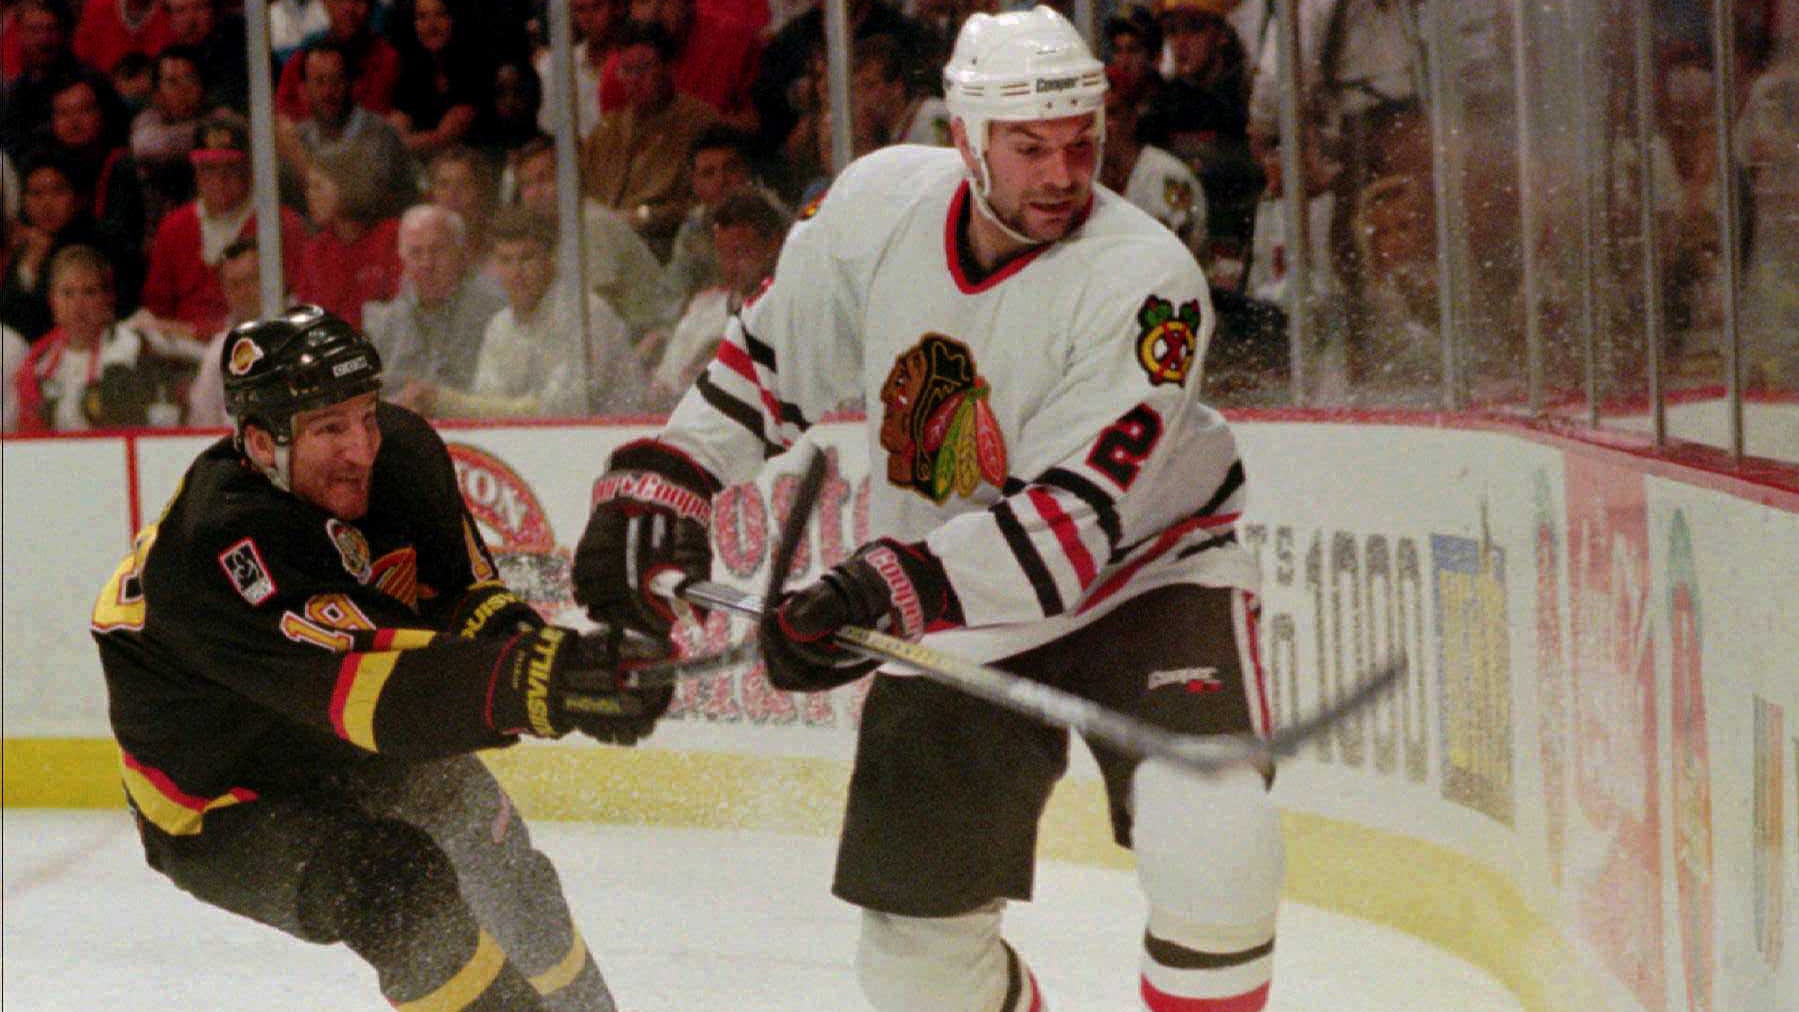 Vancouver Canucks' Tim Hunter, left, checks Chicago Blackhawks' Eric Weinrich as the two battle for the puck during the first period of their second-round playoff game on May 23, 1995, in Chicago.